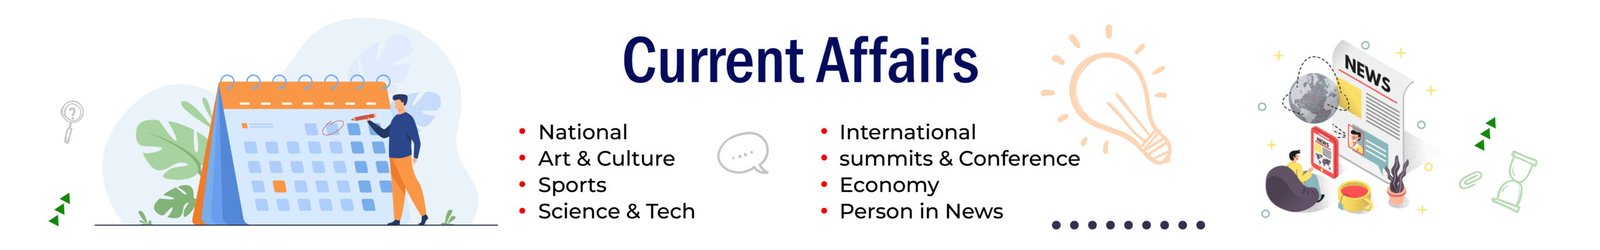 Current Affairs Web banner